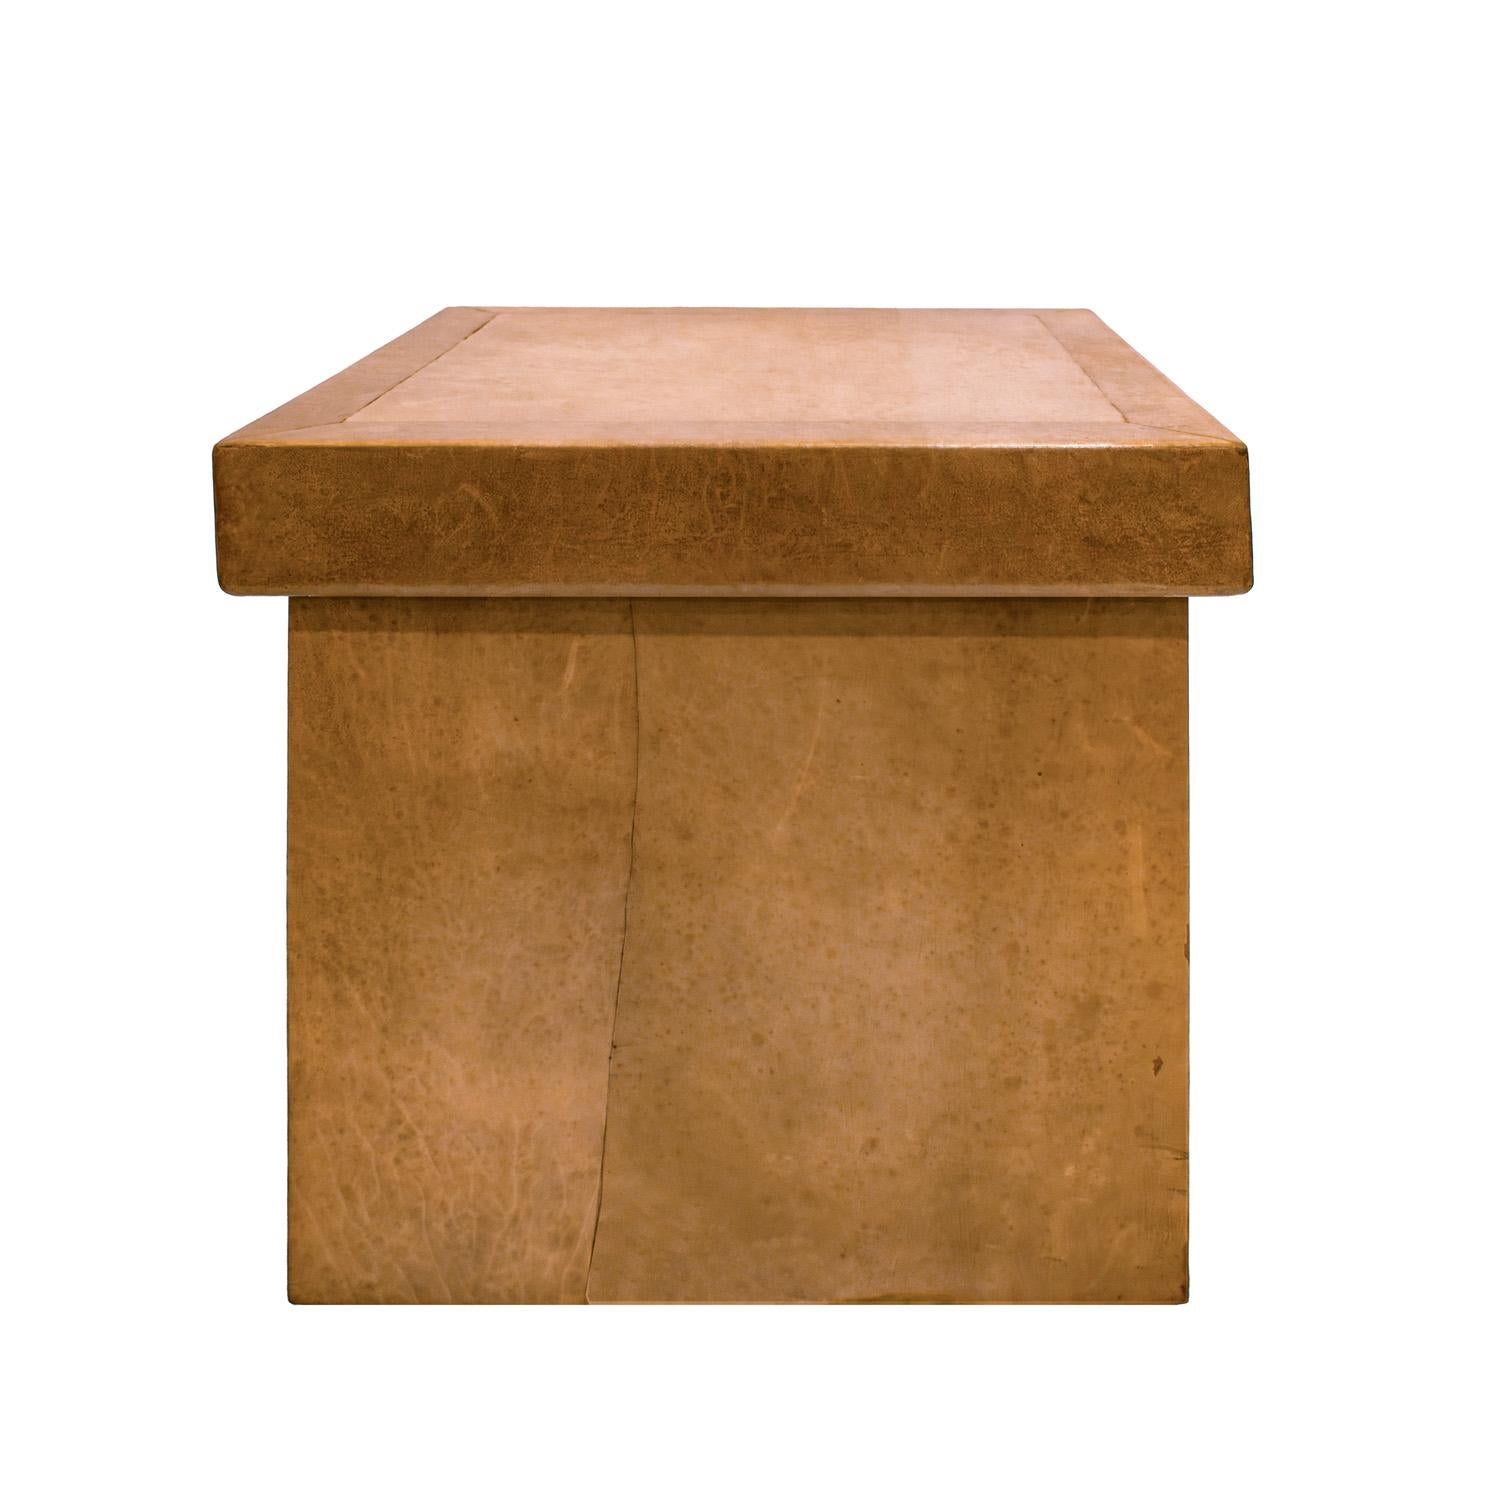 Exceptional Box Table with brown leather on the outside and inside by Karl Springer, American 1976-78.  The bottom is covered in silk moiré. This was made as a prototype.  The skin work, as with all Springer pieces, is superb.


Reference:
Purchased